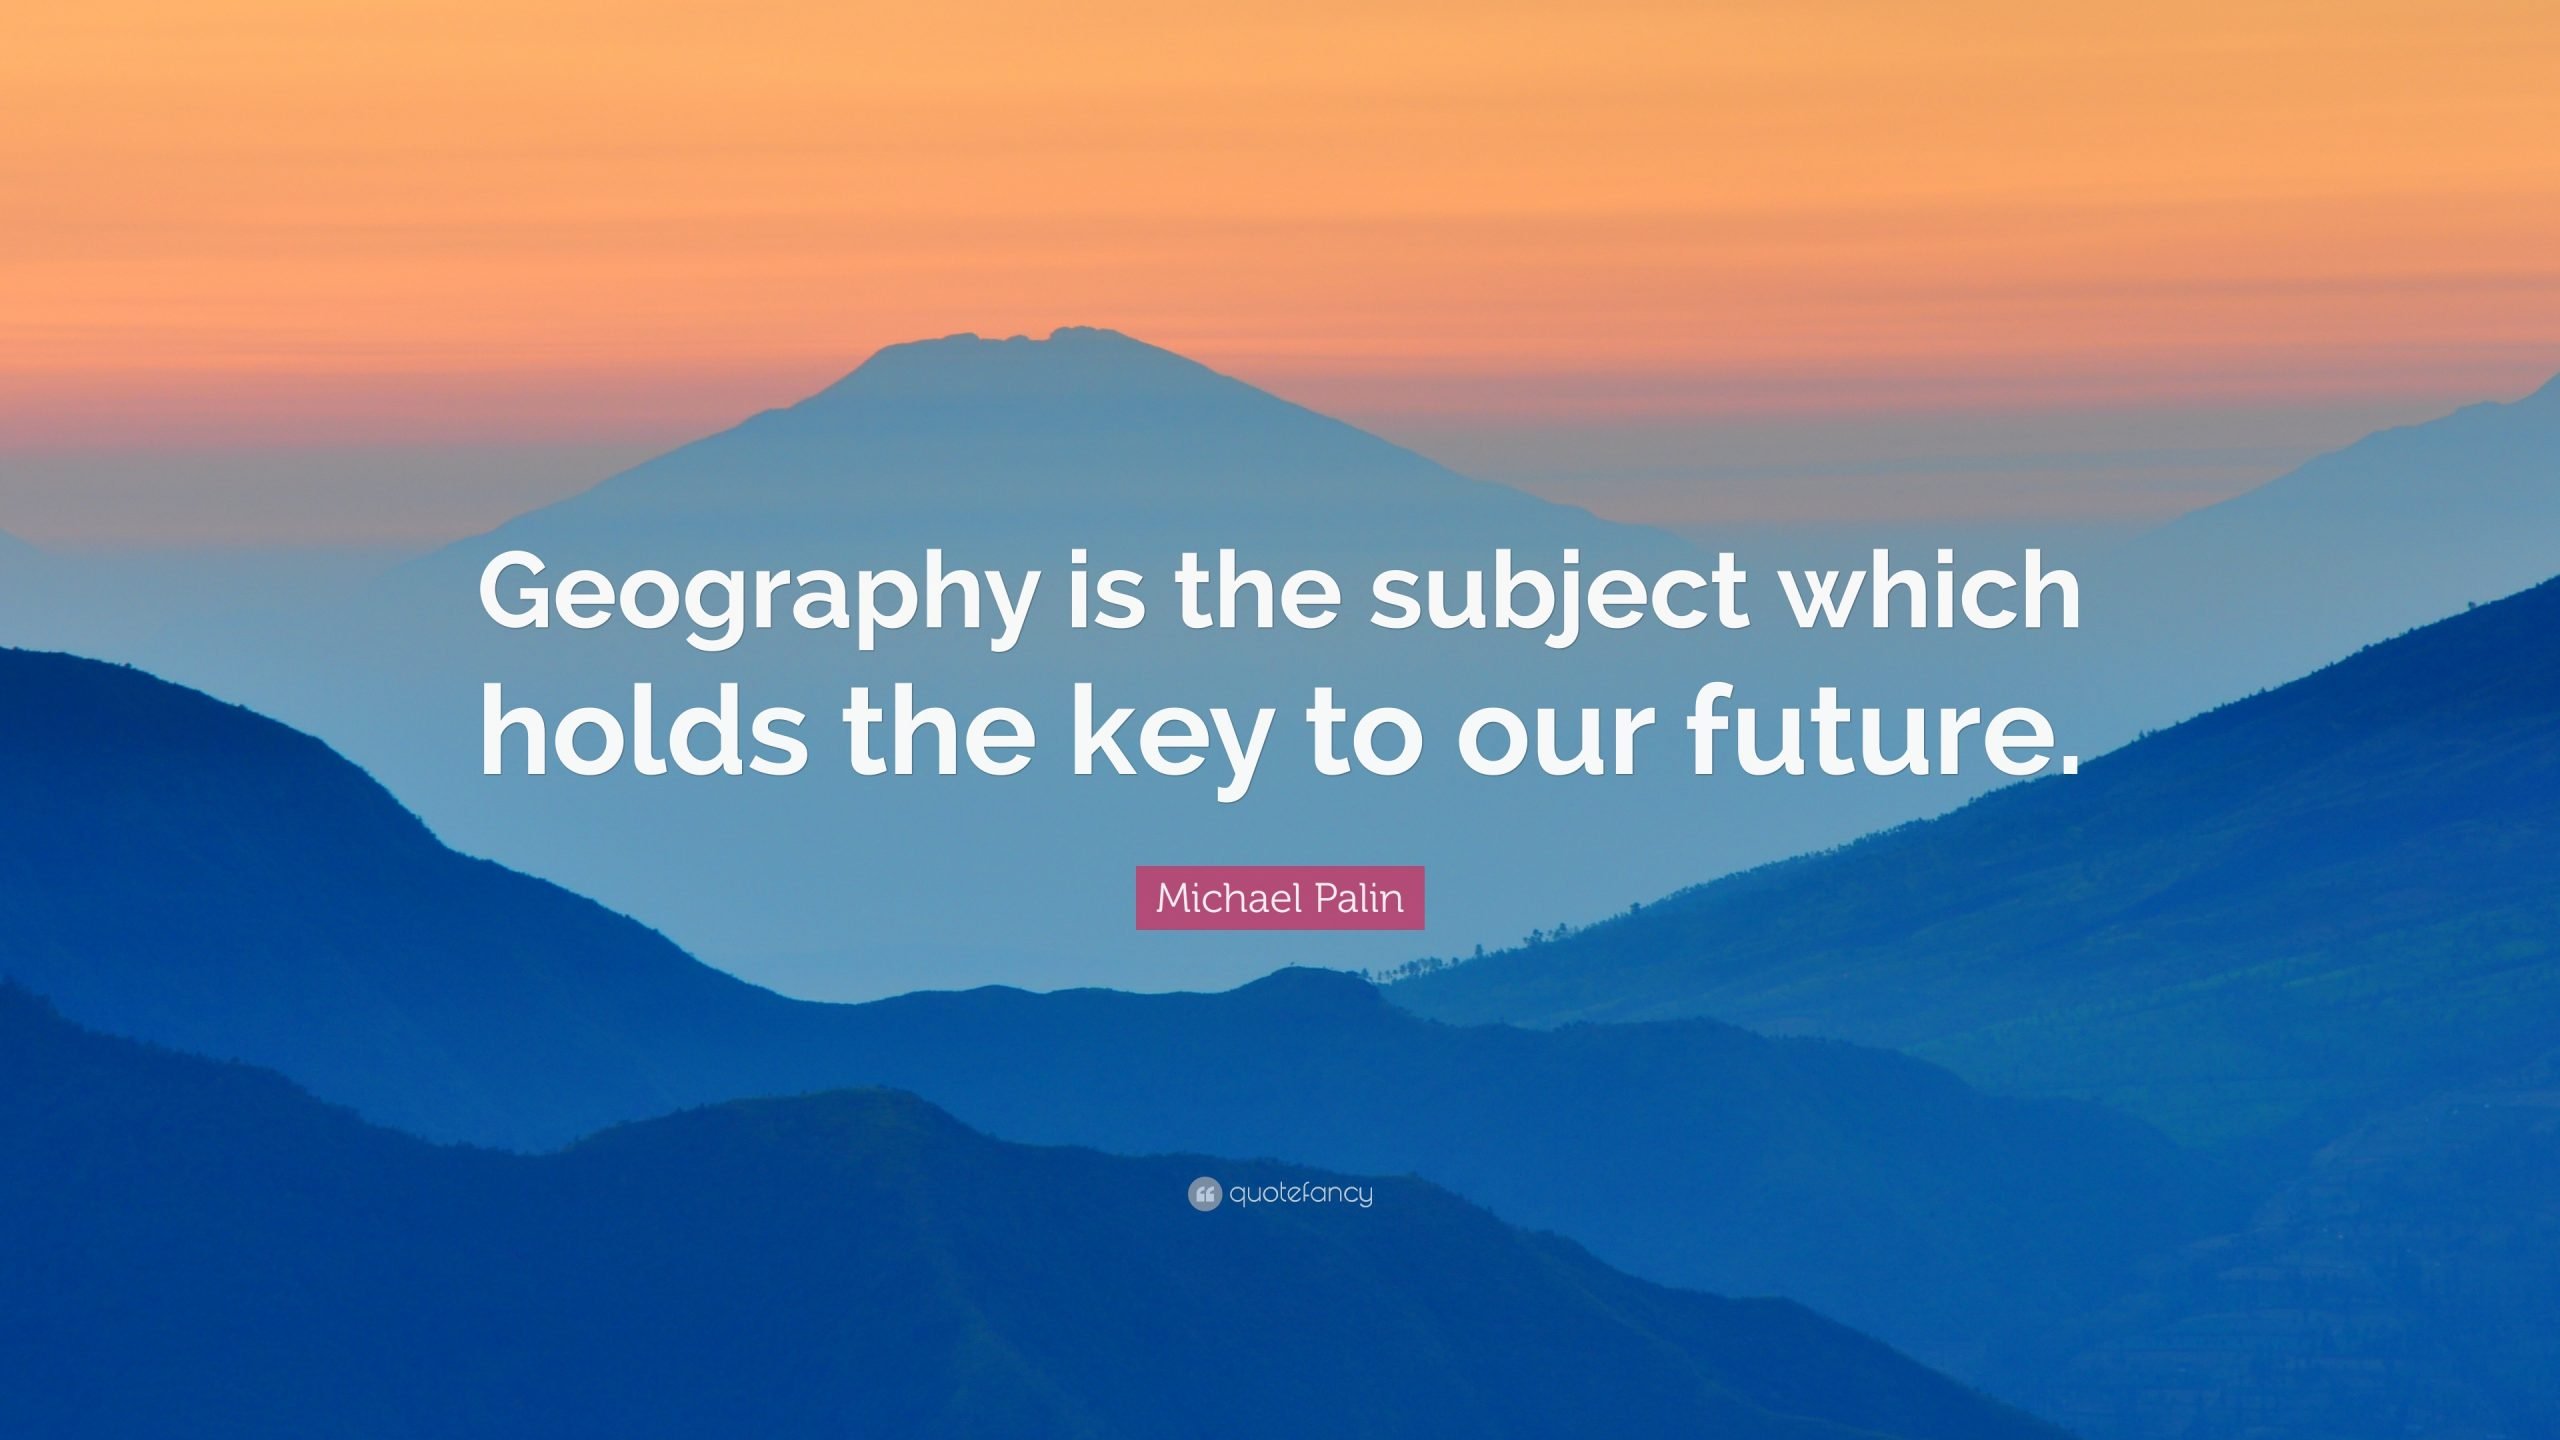 Michael Palin Quote: Geography is the subject which holds ...